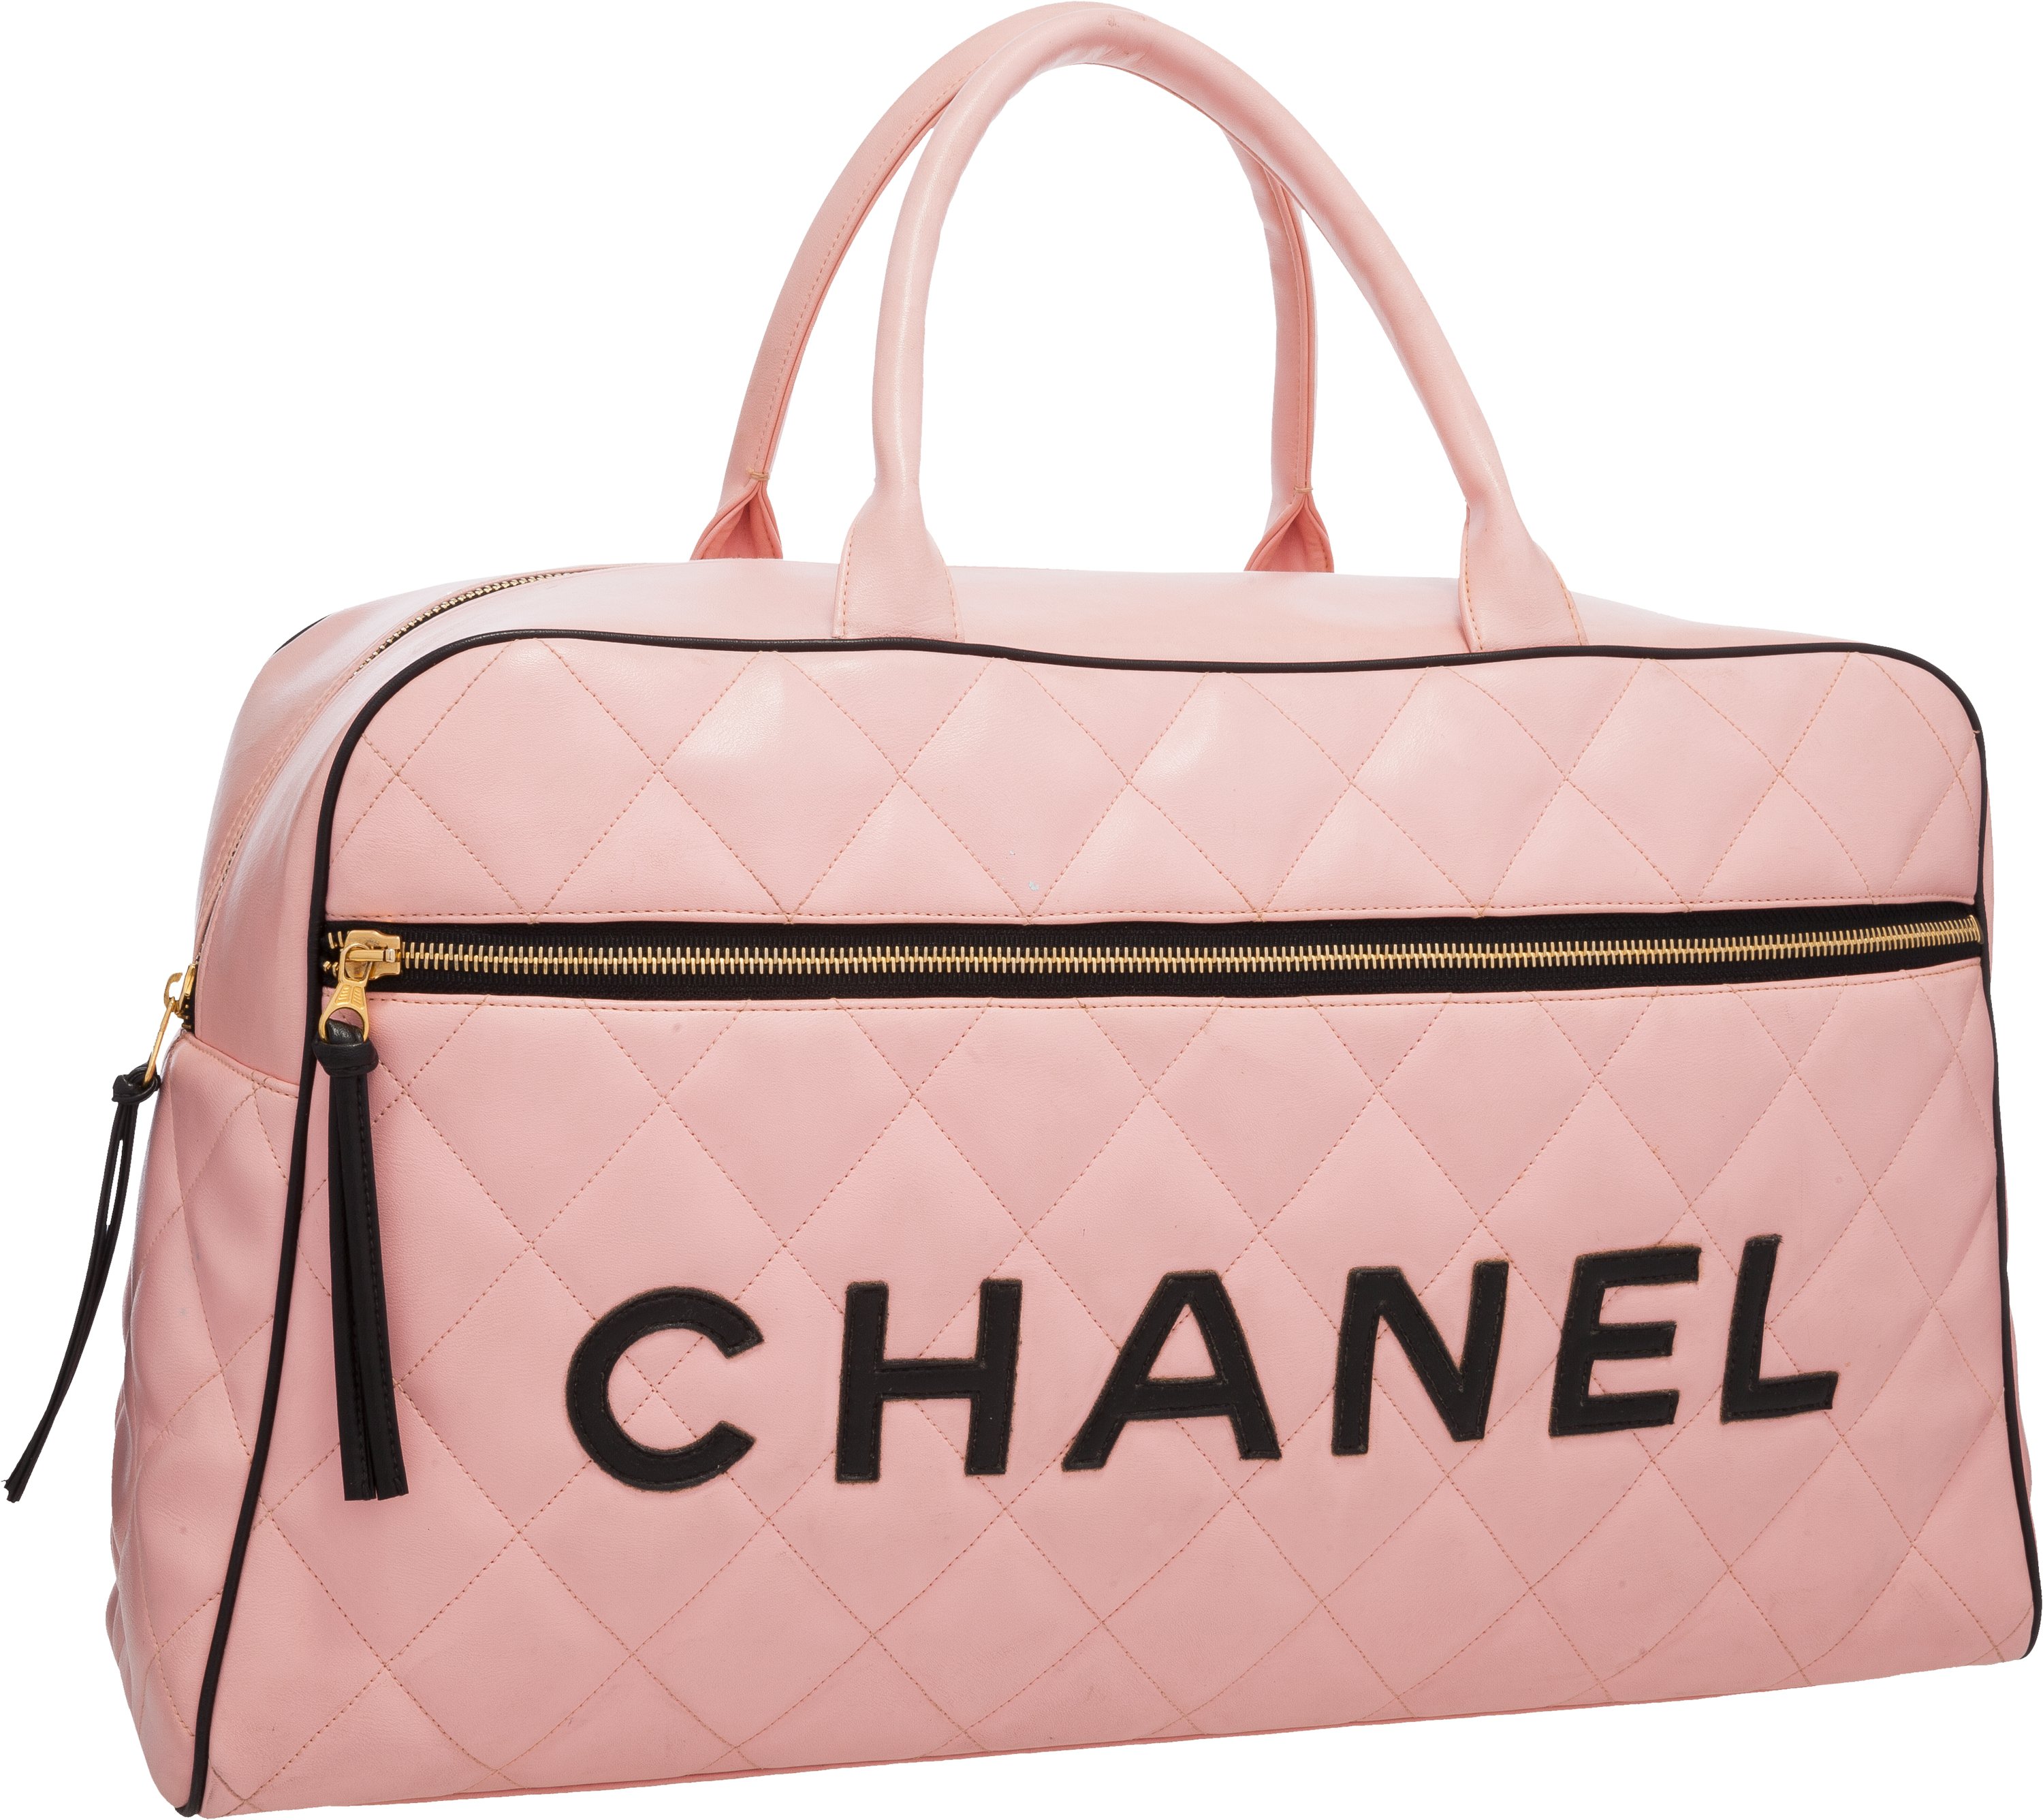 Chanel Pink Quilted Lambskin Leather Weekender Travel Bag. Good